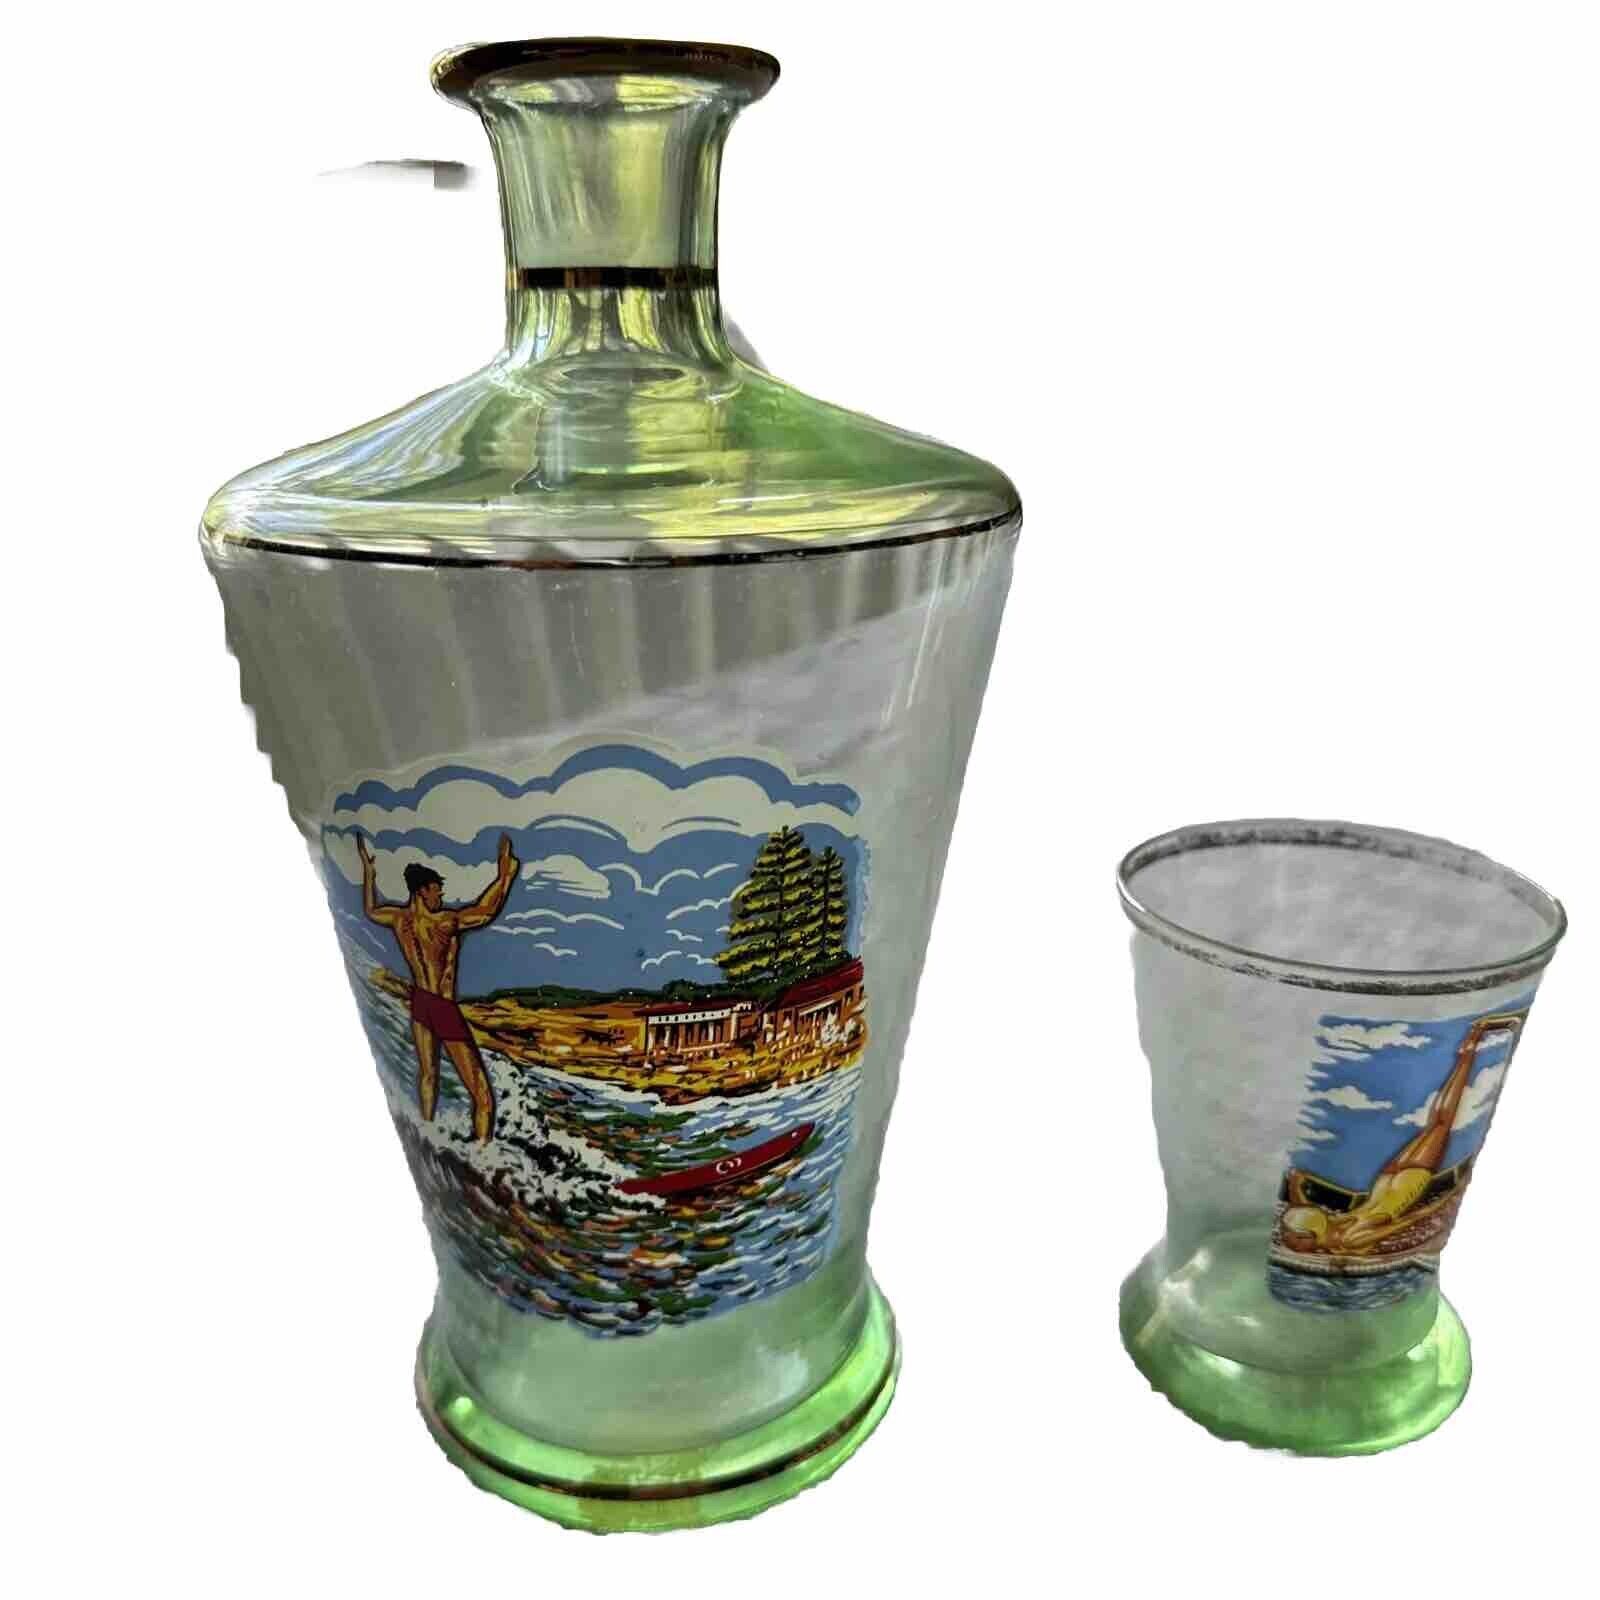 Vintage Alpine Beach / Swimming/Surfing/Diving Themed  Green Decanter With Glass